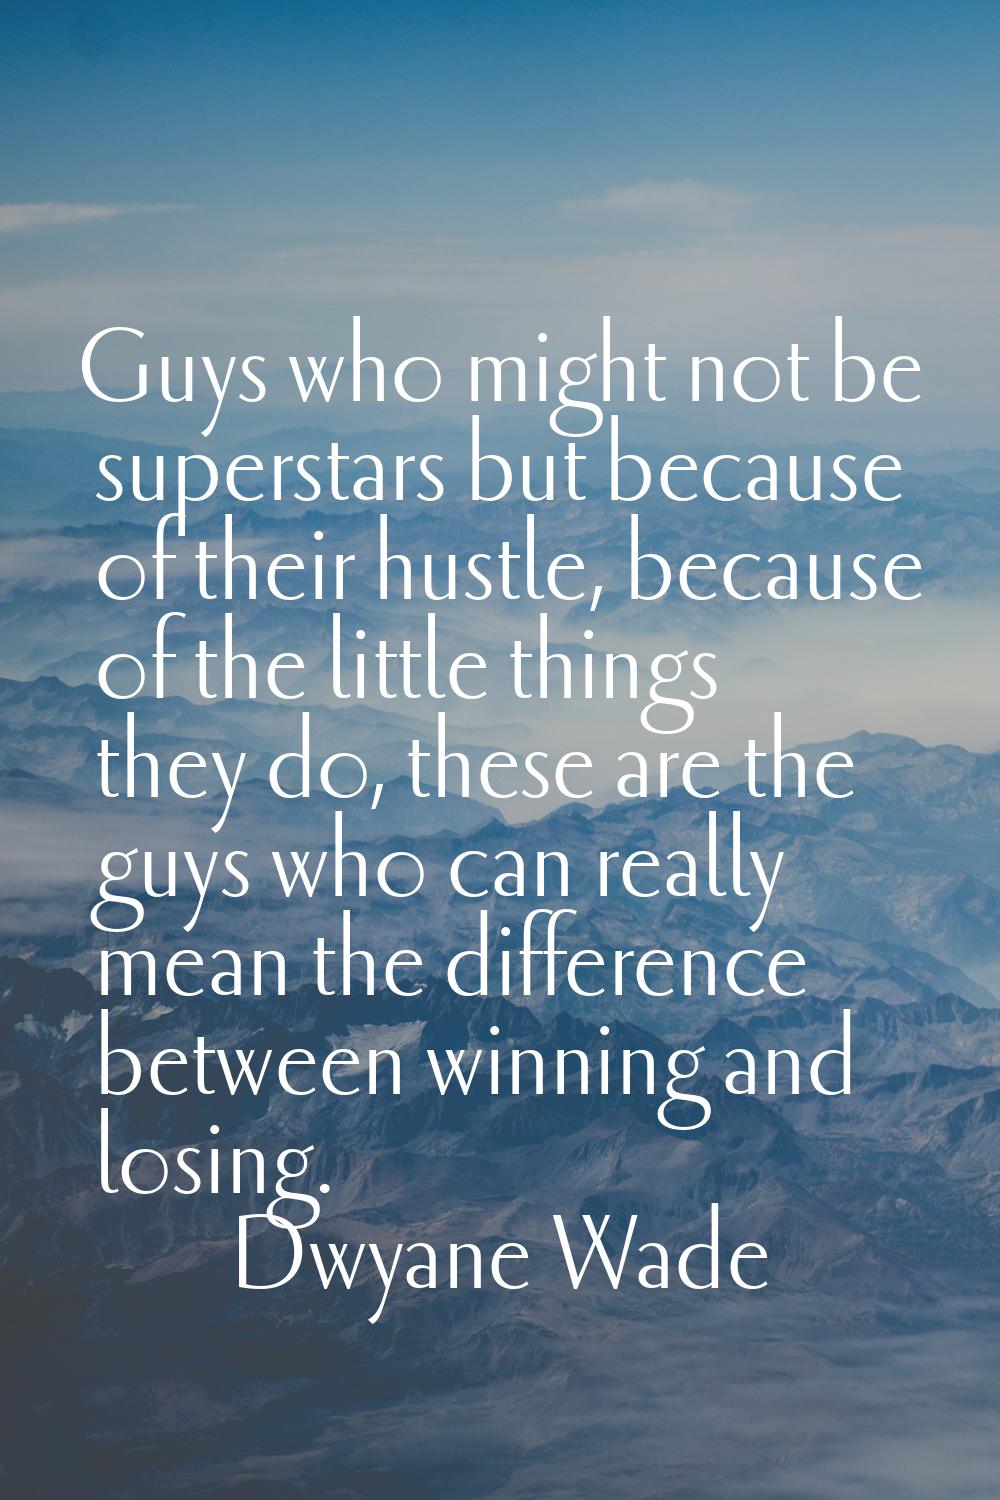 Guys who might not be superstars but because of their hustle, because of the little things they do,